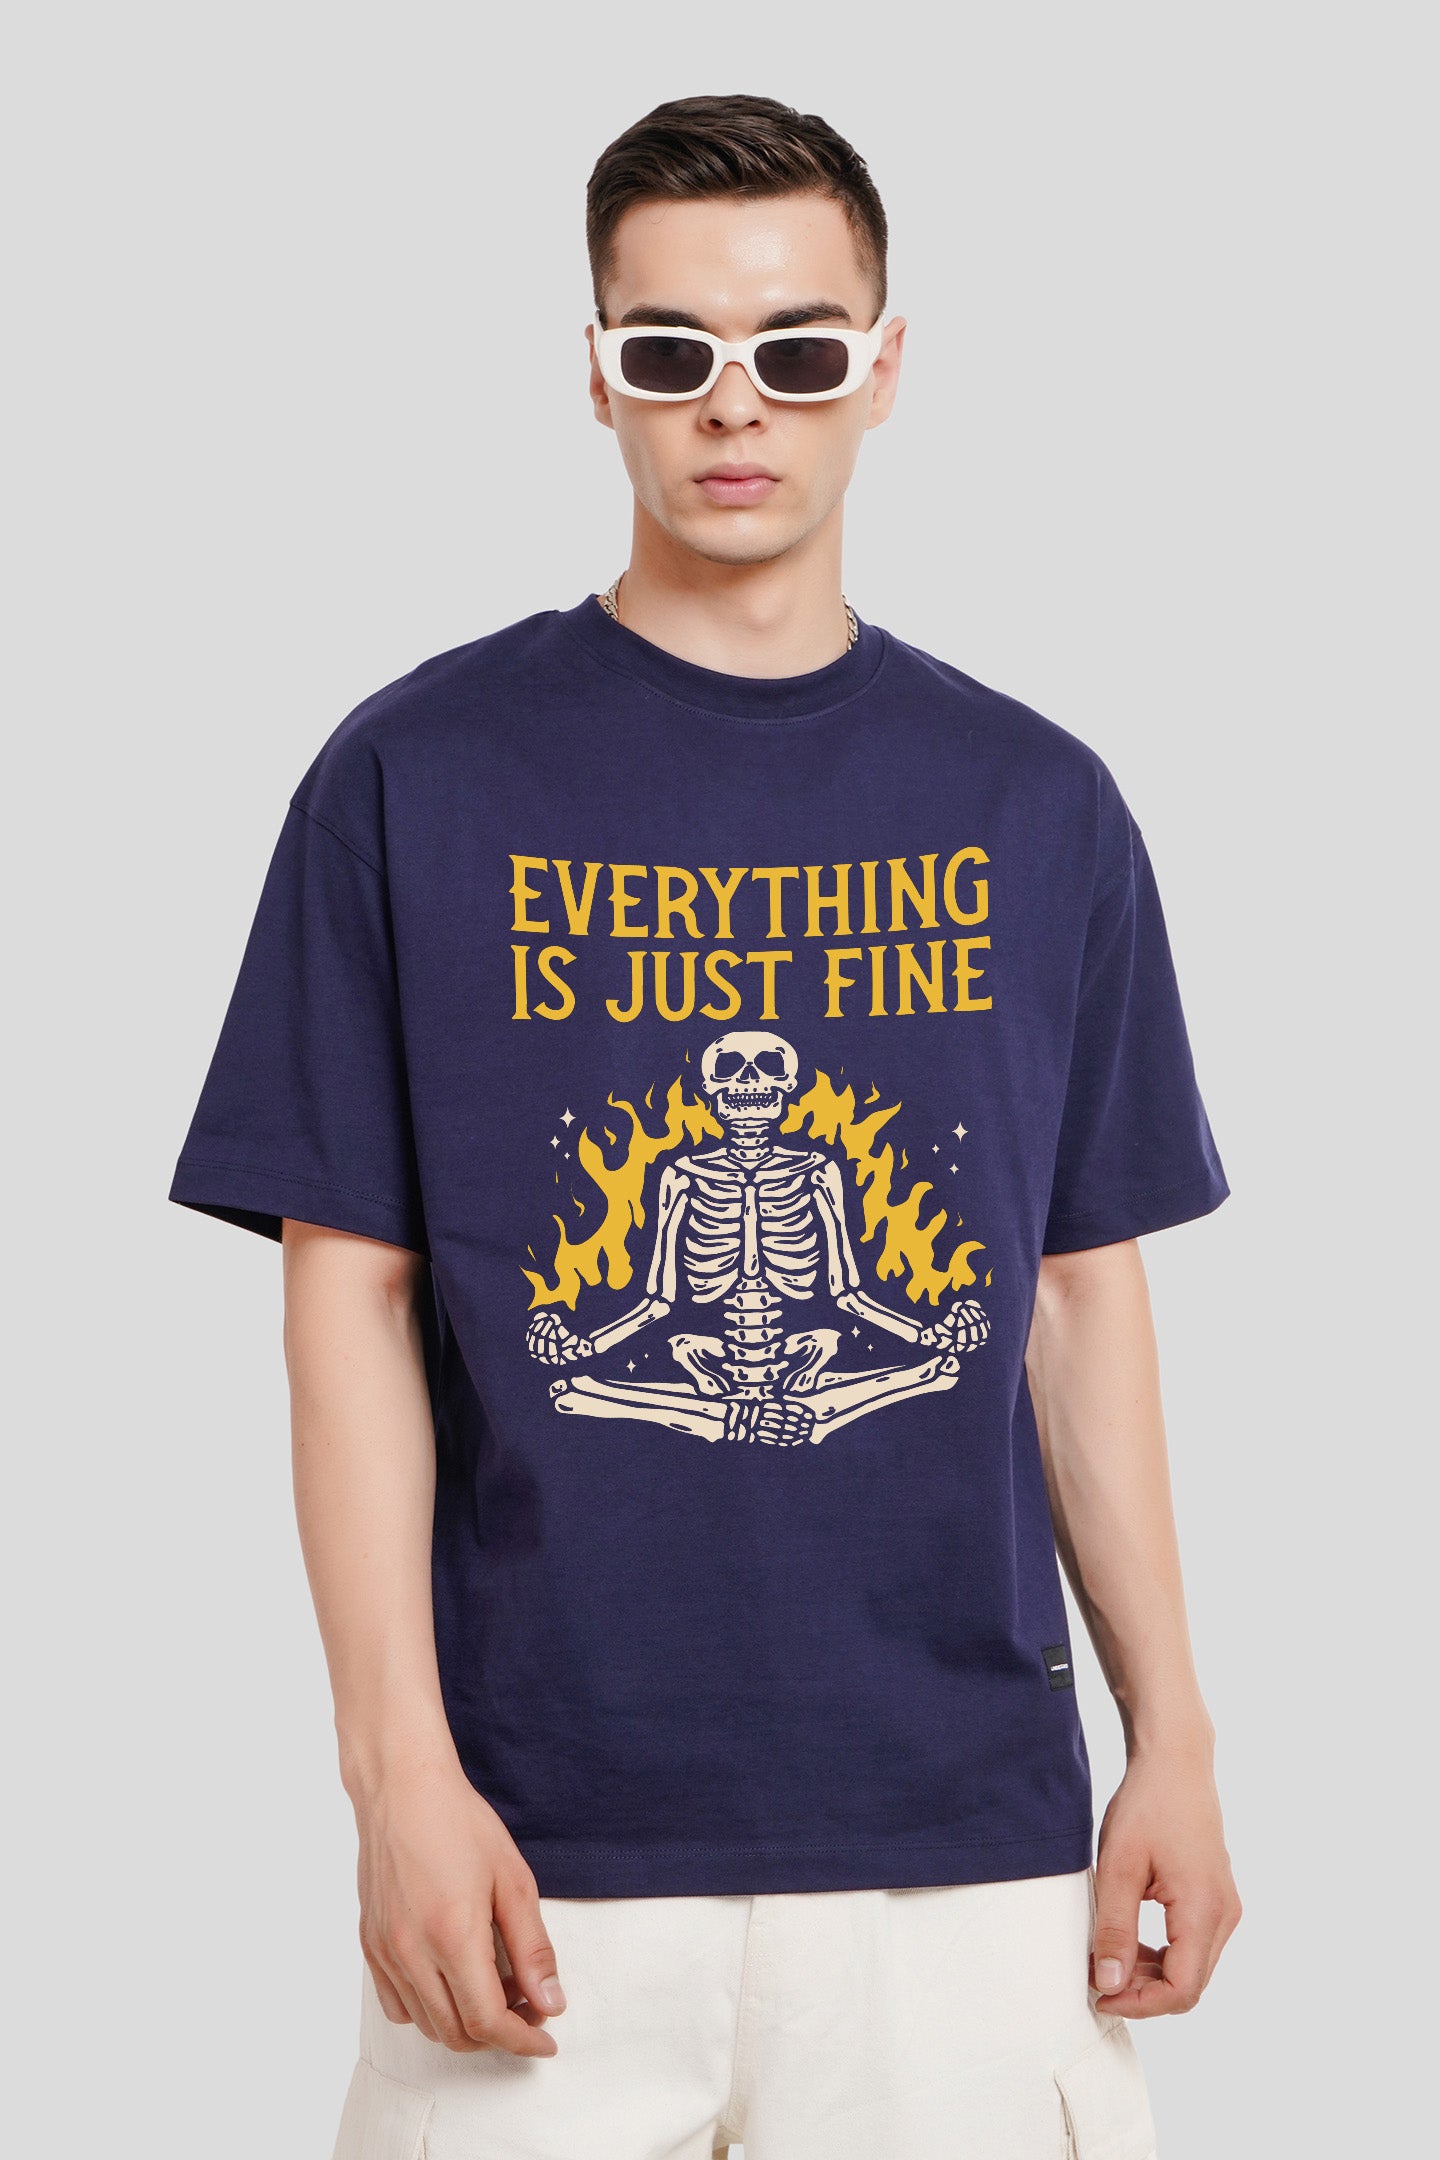 Everything Just Fine Navy Blue Printed T Shirt Men Oversized Fit With Front Design Pic 1